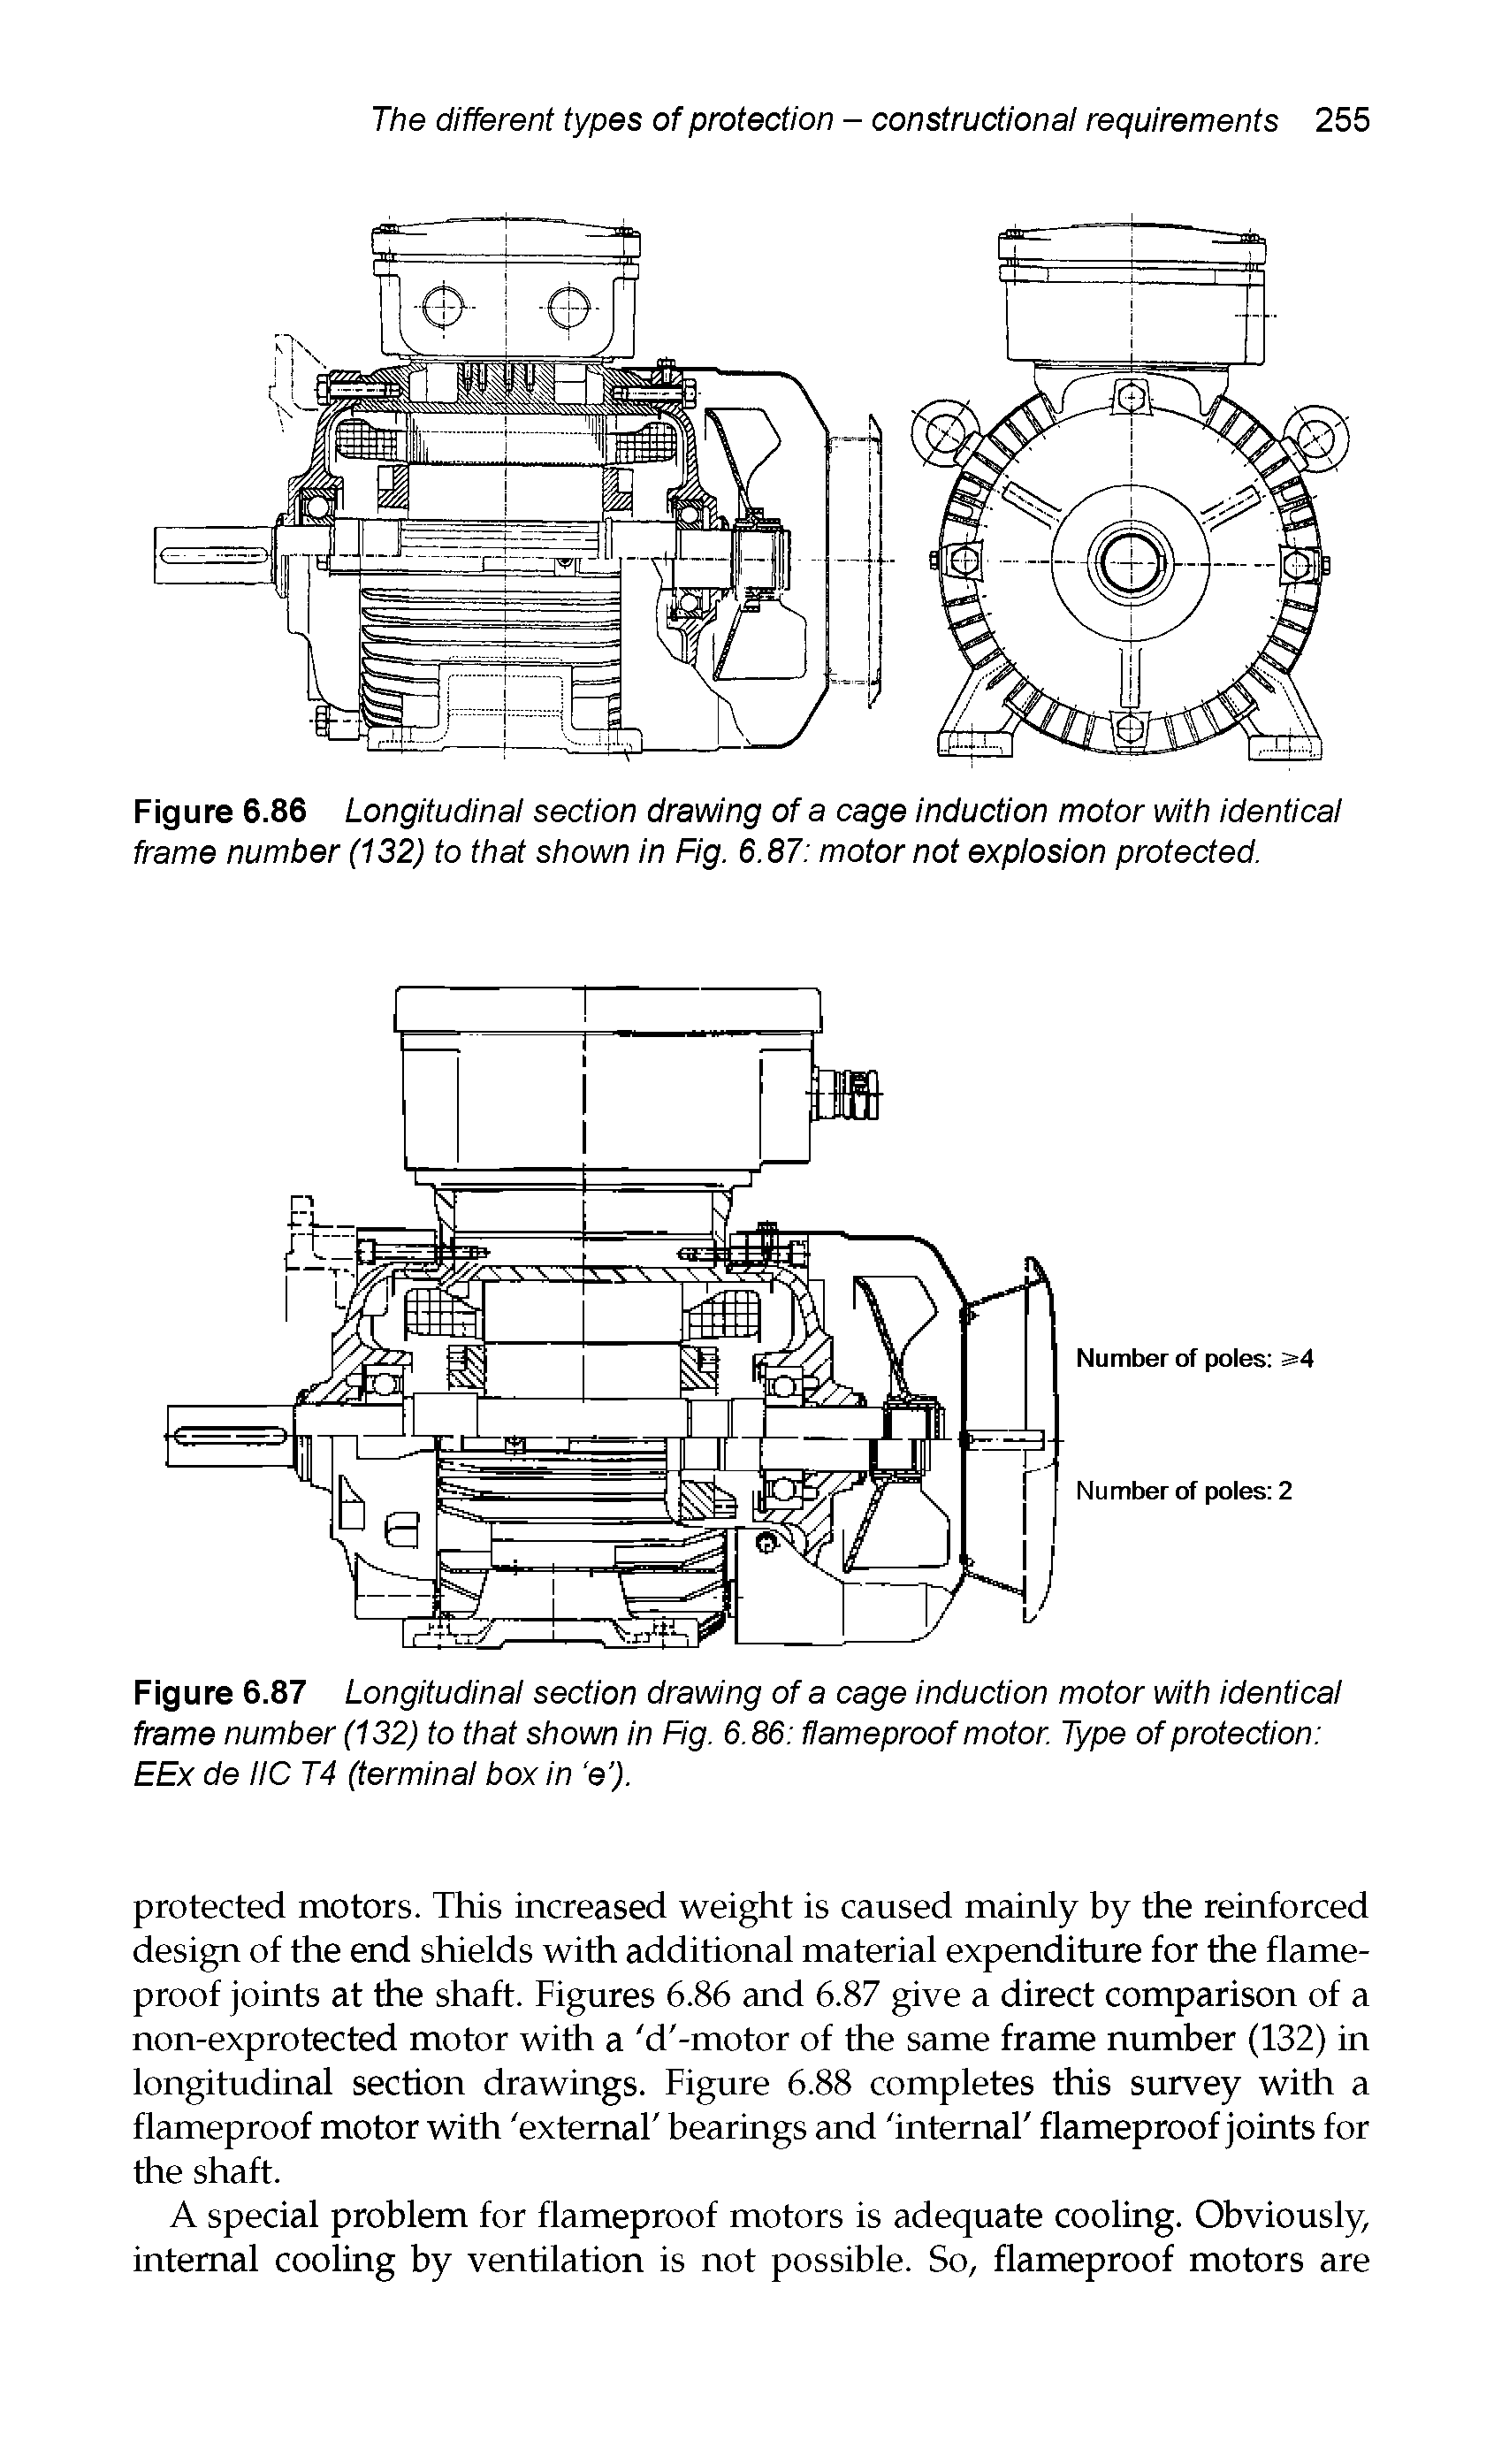 Figure 6.87 Longitudinal section drawing of a cage induction motor with identical frame number (132) to that shown in Fig. 6.86 flameproof motor. Type of protection EEx de IIC T4 (terminal box in e ).